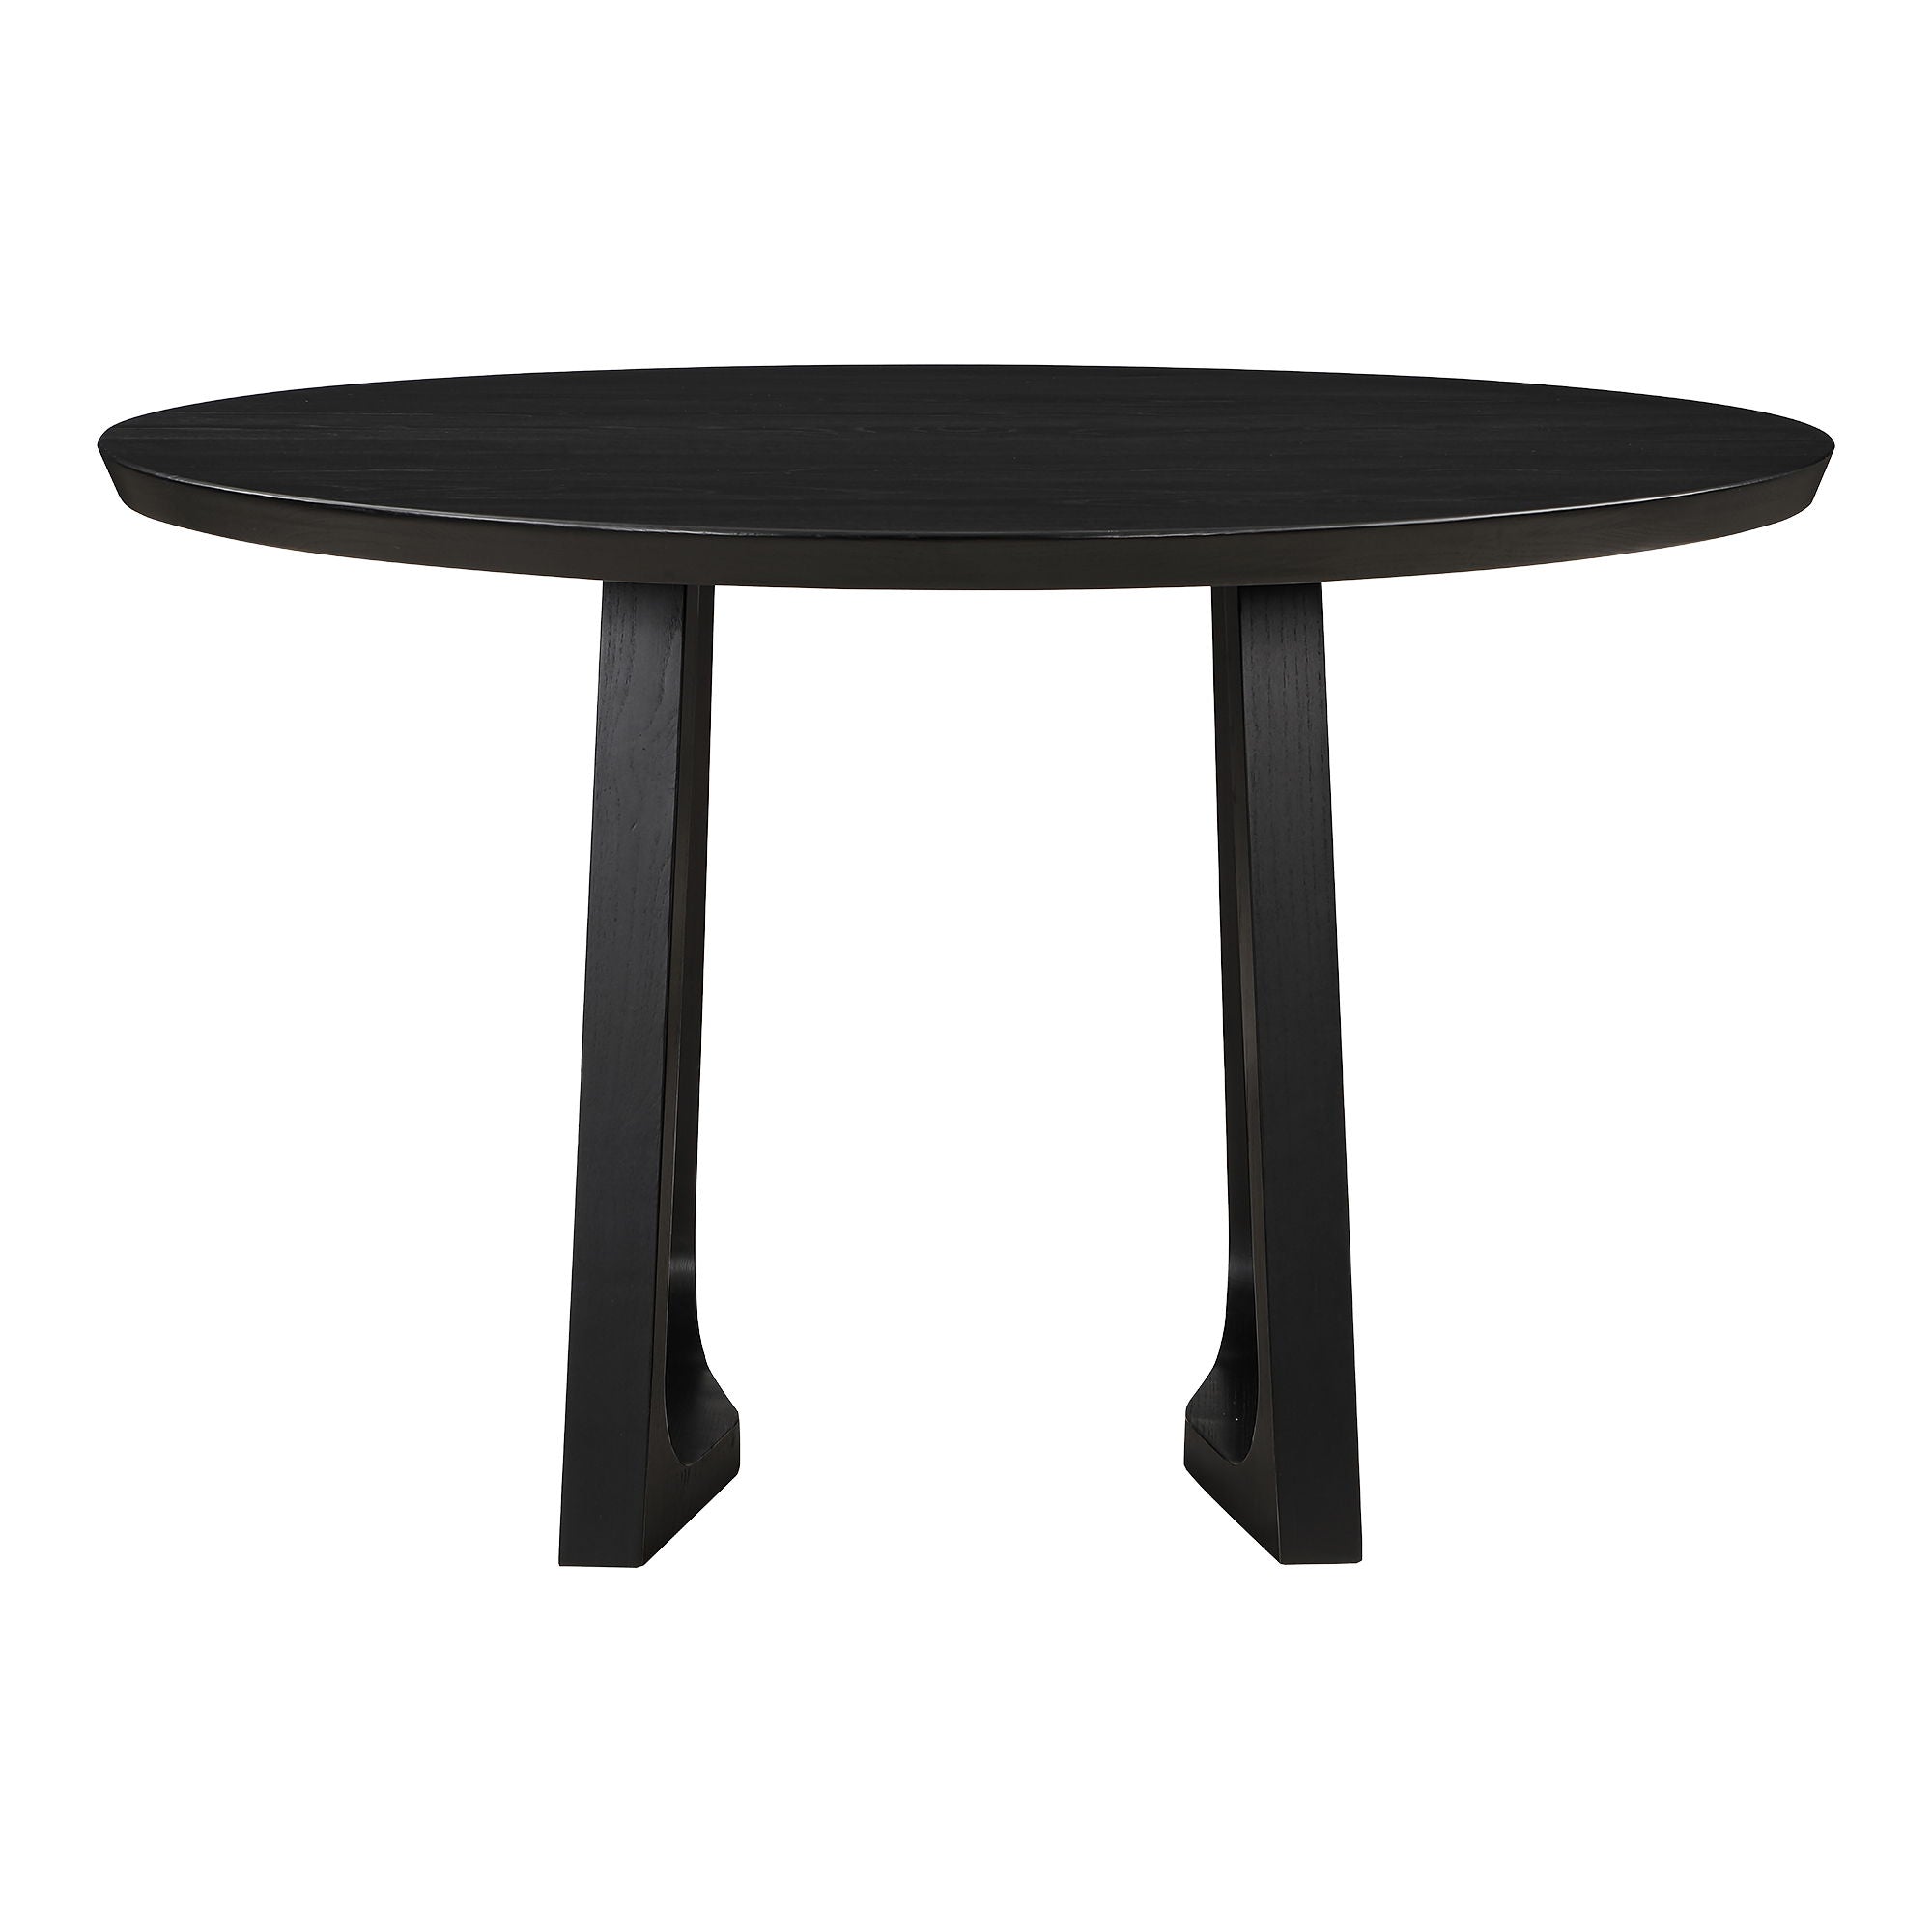 Silas - Round Dining Table - Black Ash